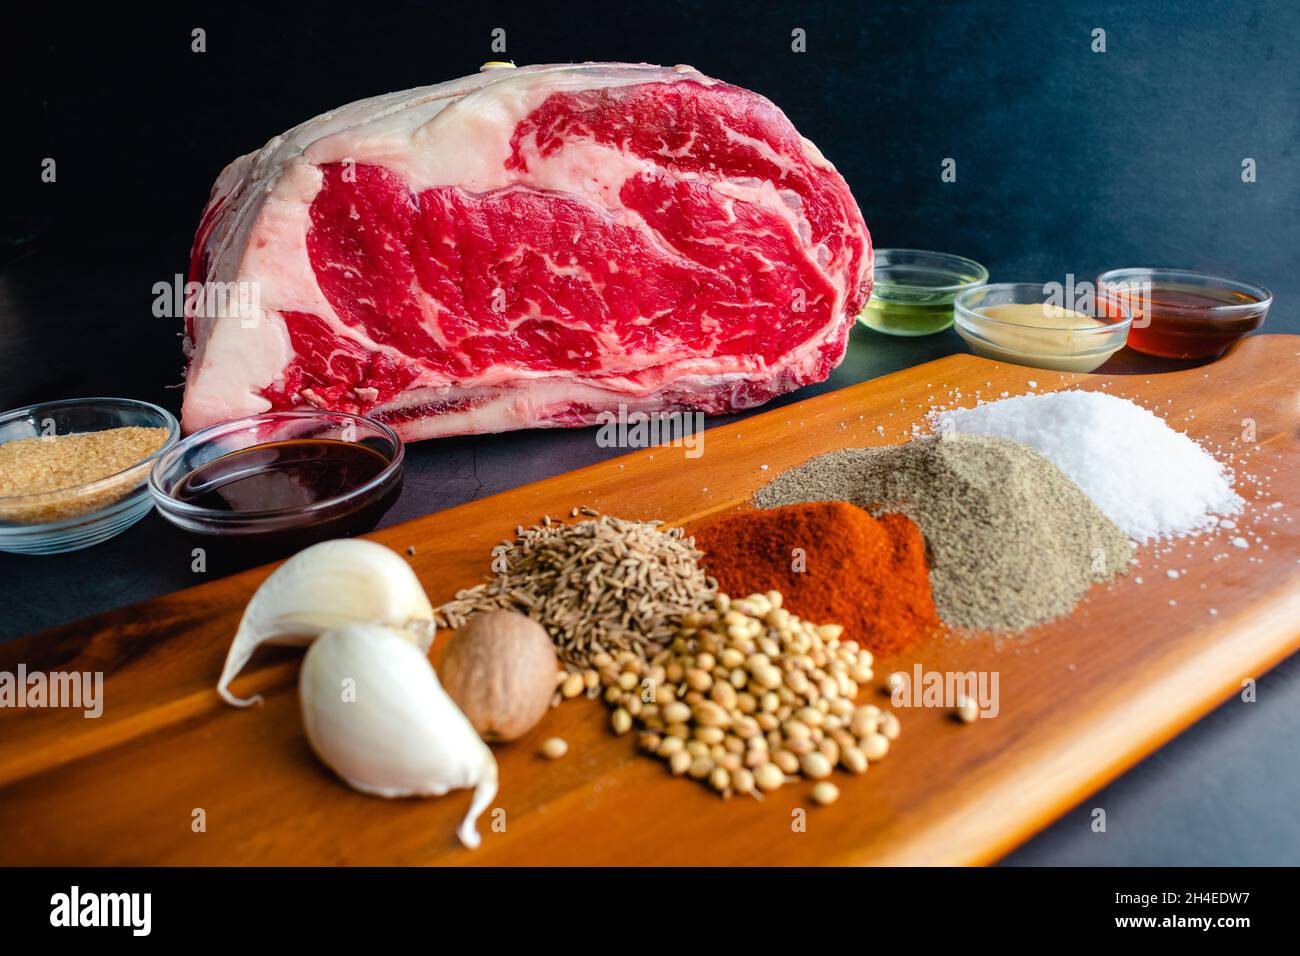 Standing Prime Rib Roast Ingredients: Uncooked beef rib roast with spices and other ingredients Stock Photo